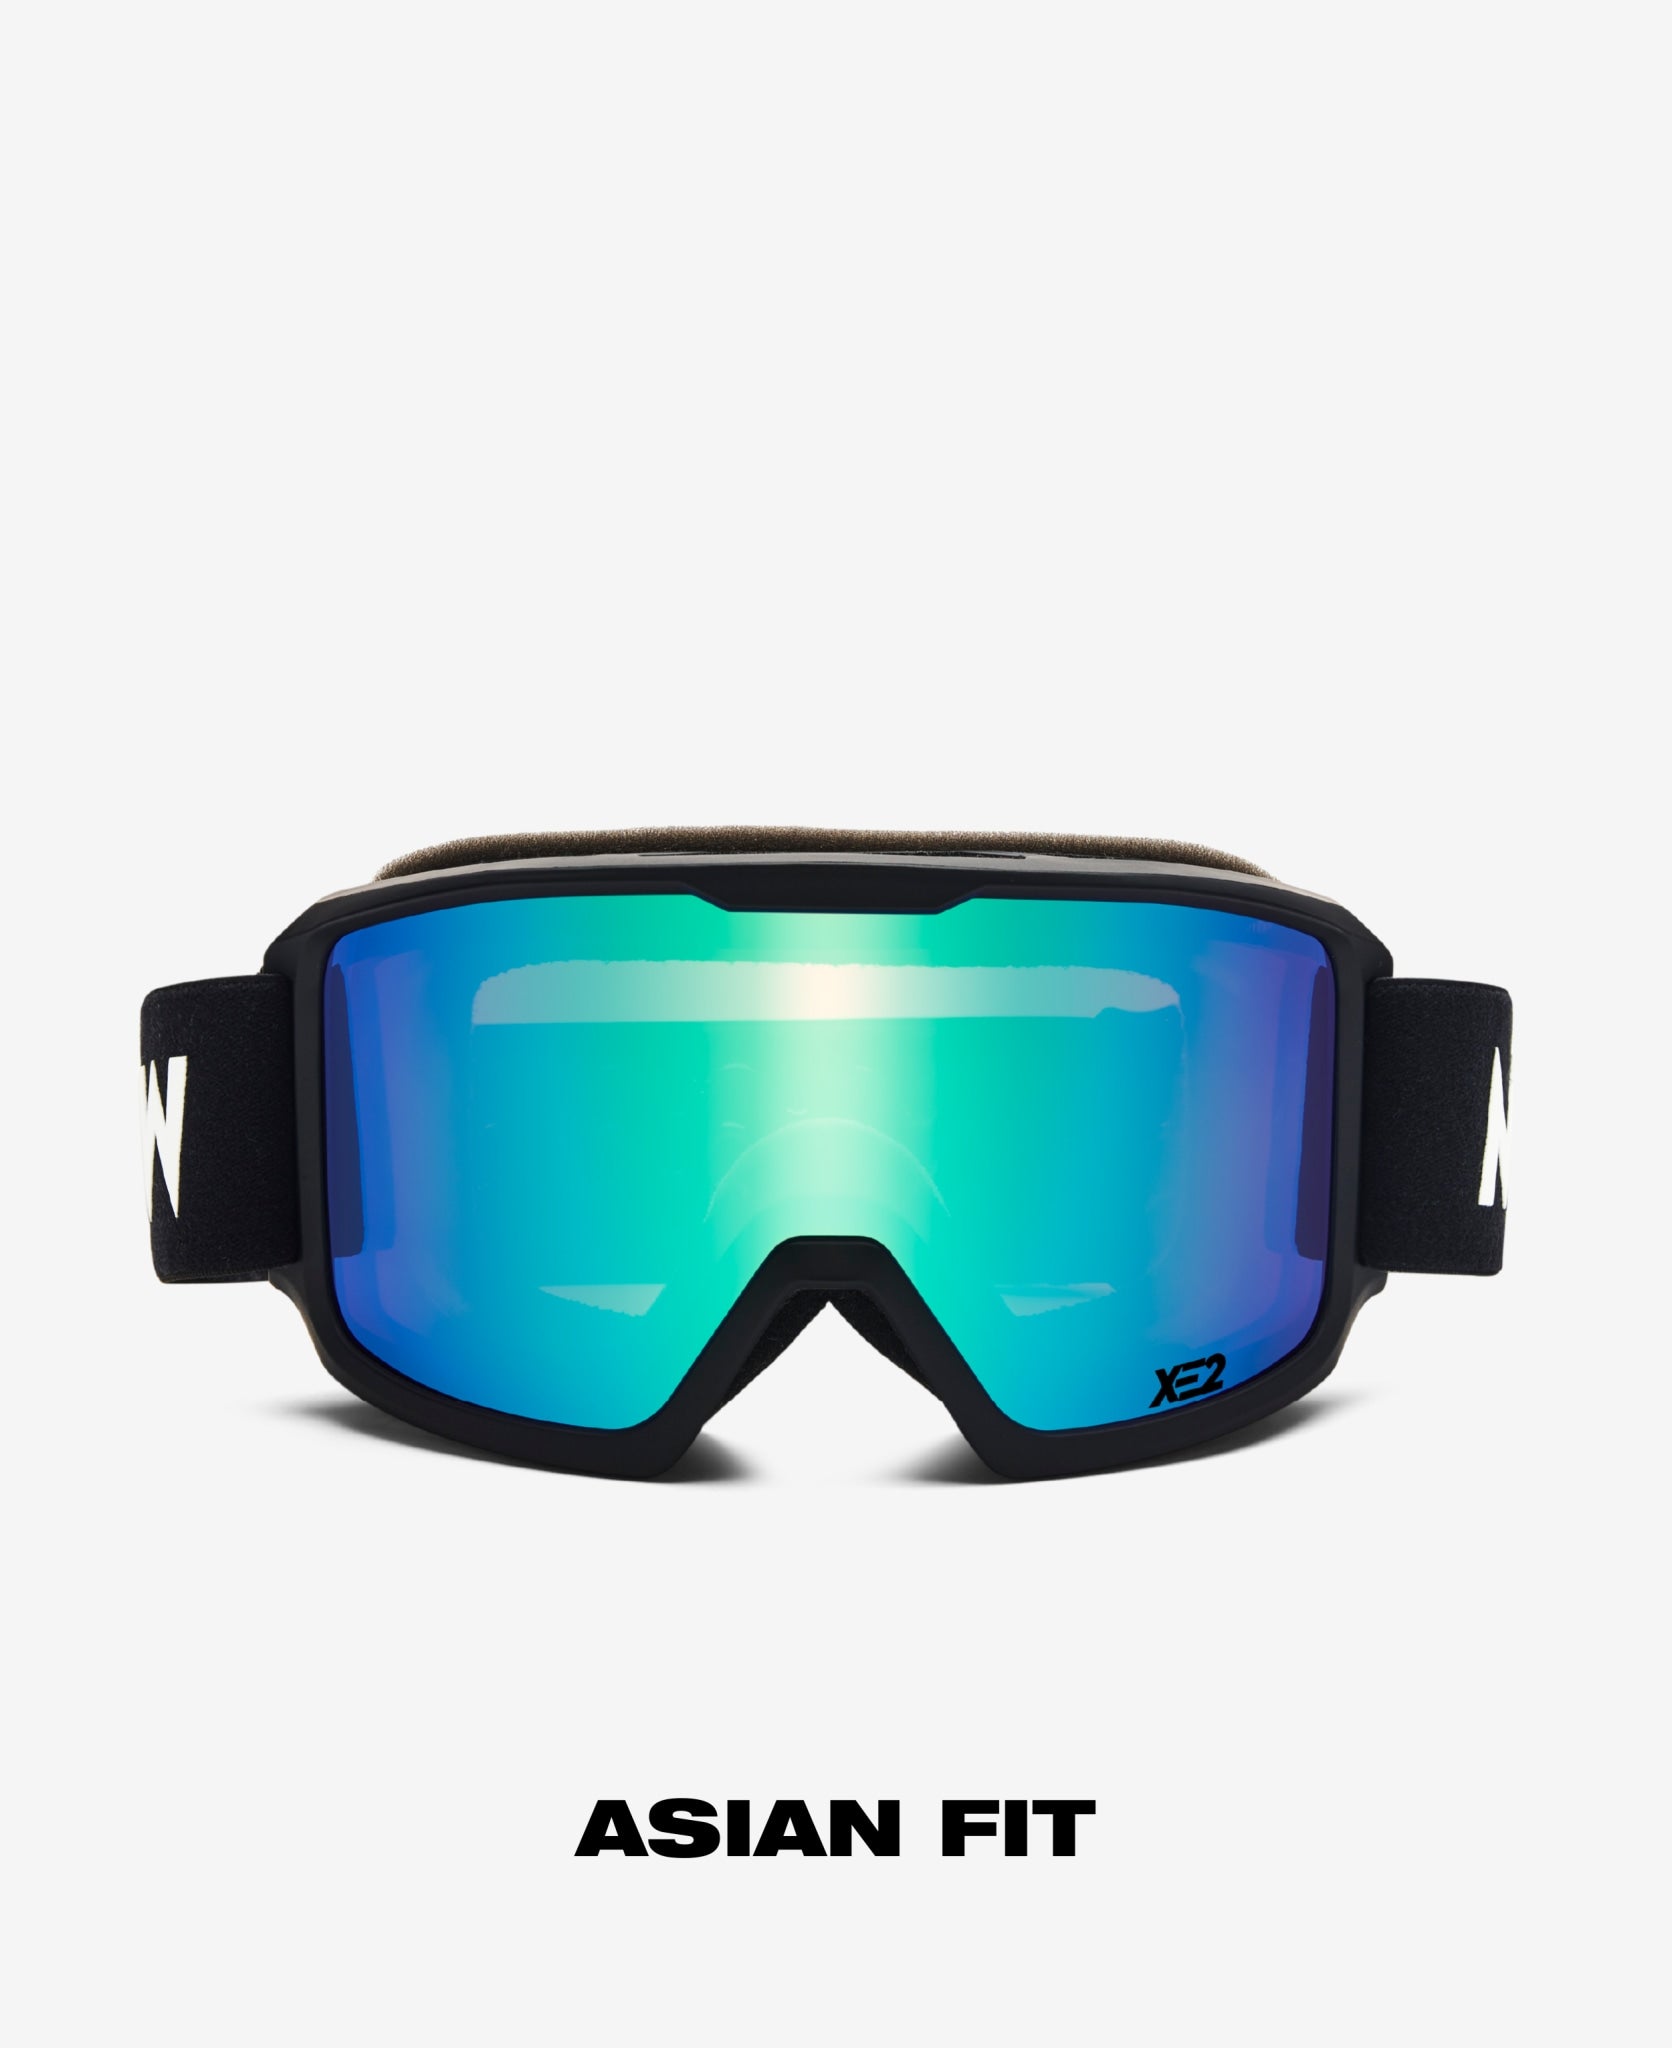 CLEAR XEP Asian fit - Army XEp Blue